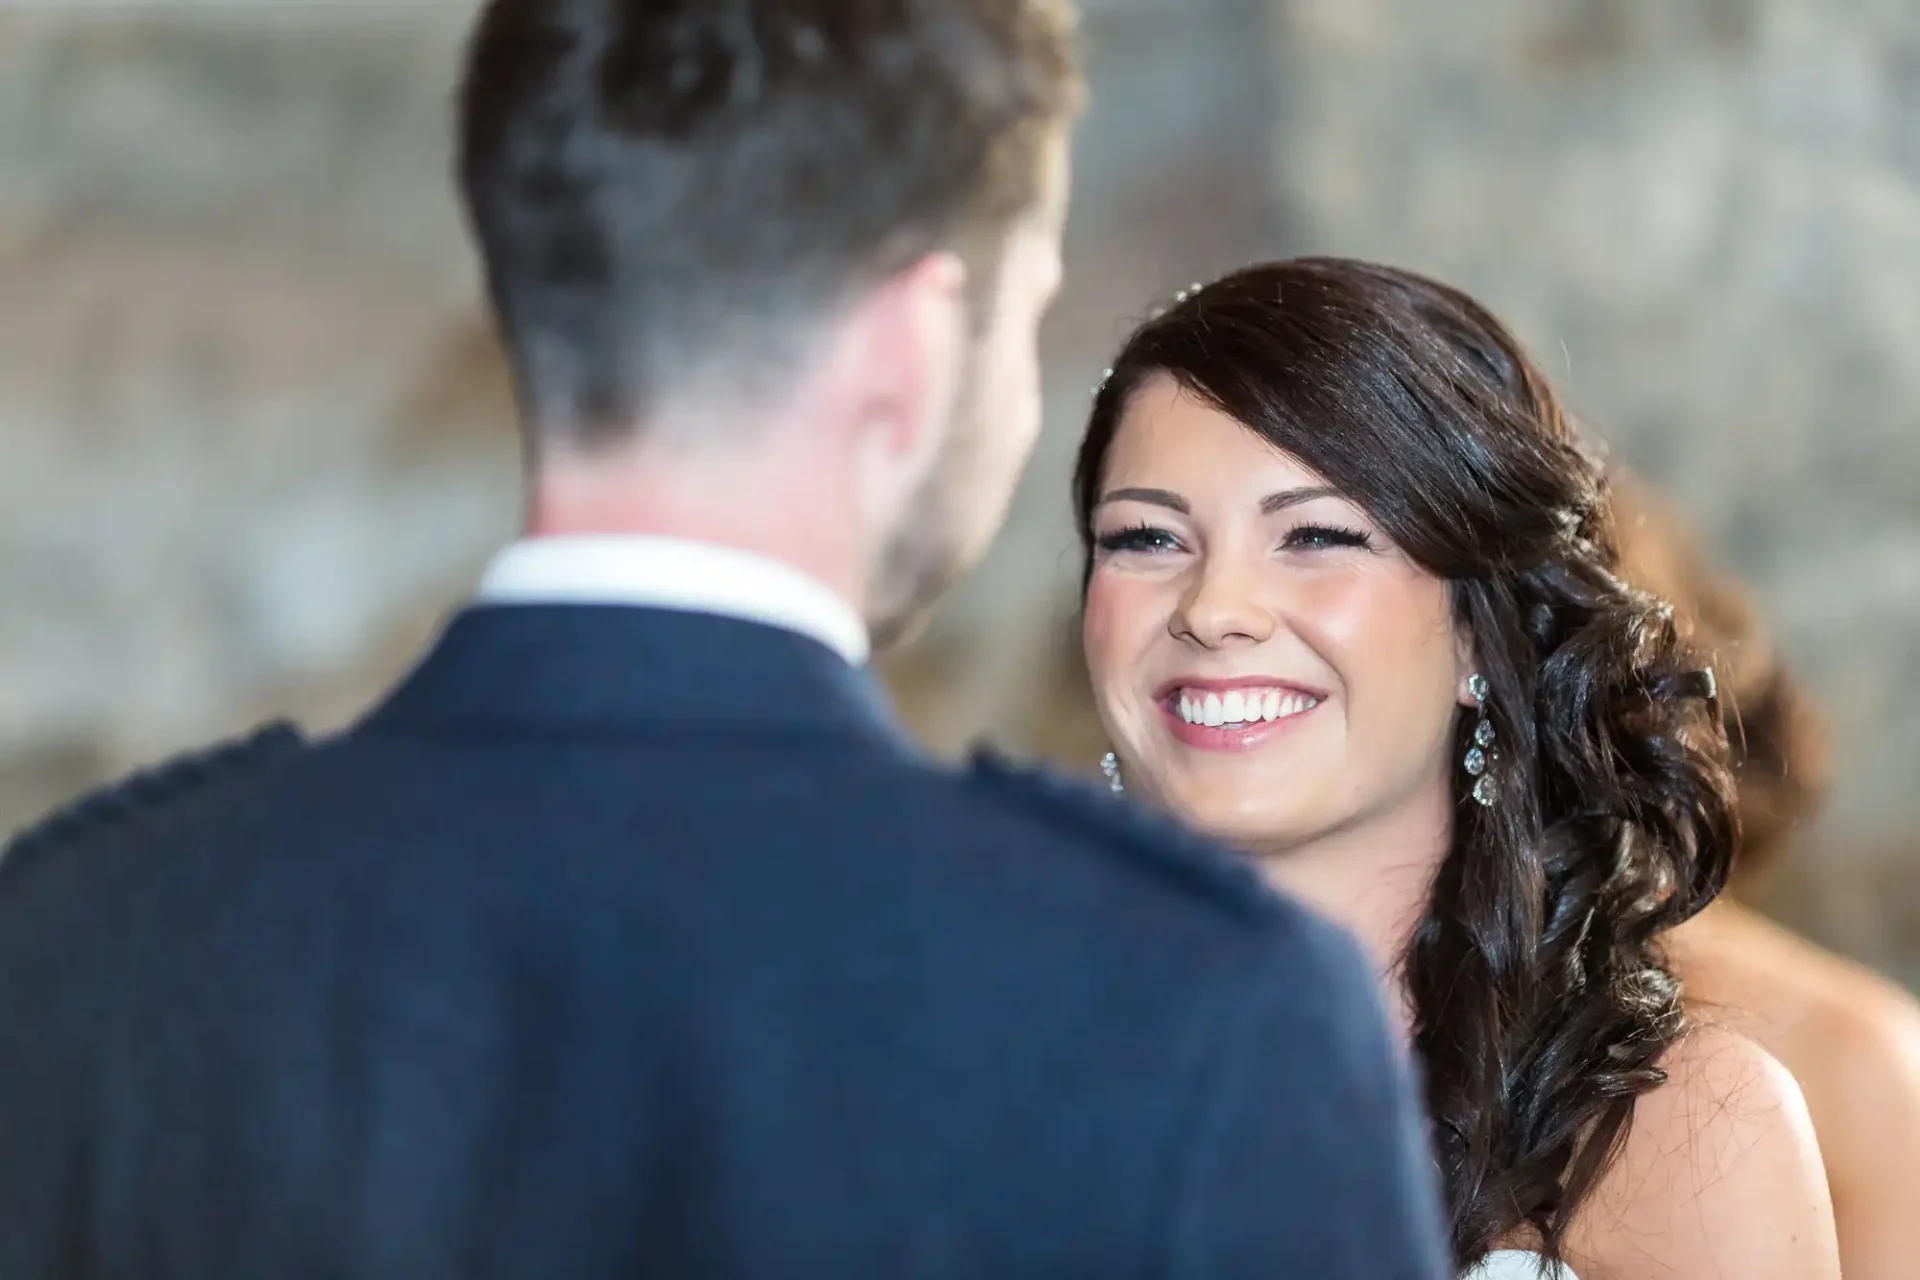 A smiling bride looking at the groom, seen from over his shoulder, in a softly lit indoor setting.